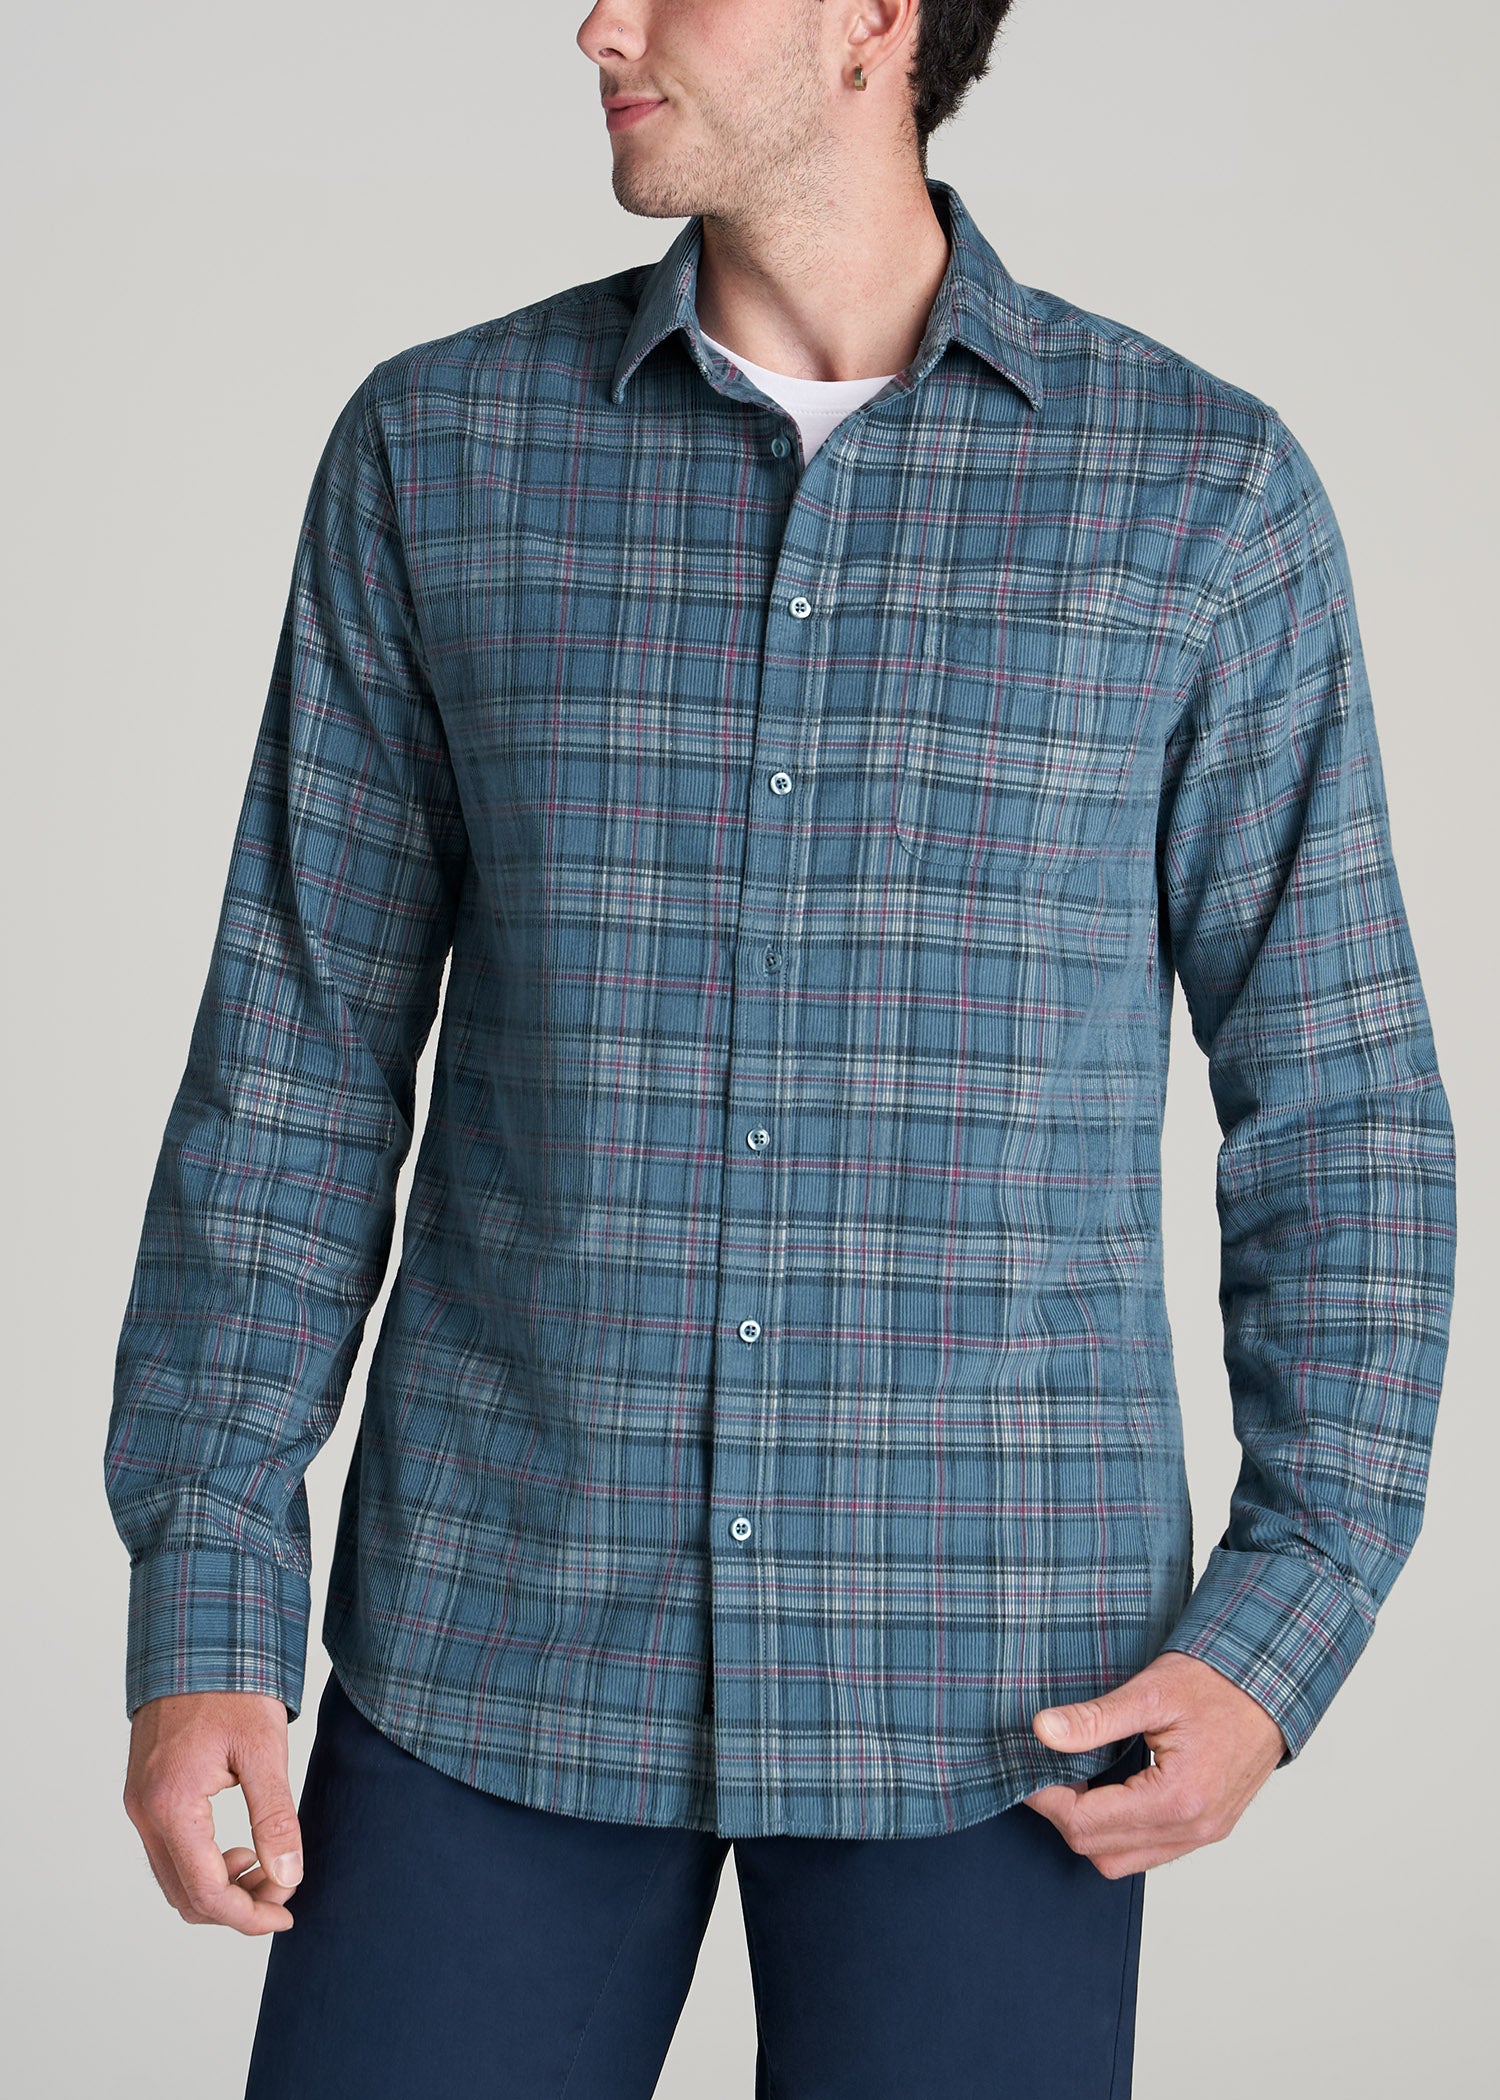       American-Tall-Men-Baby-Wale-Corduroy-Button-Shirt-Medium-Blue-Red-Plaid-front